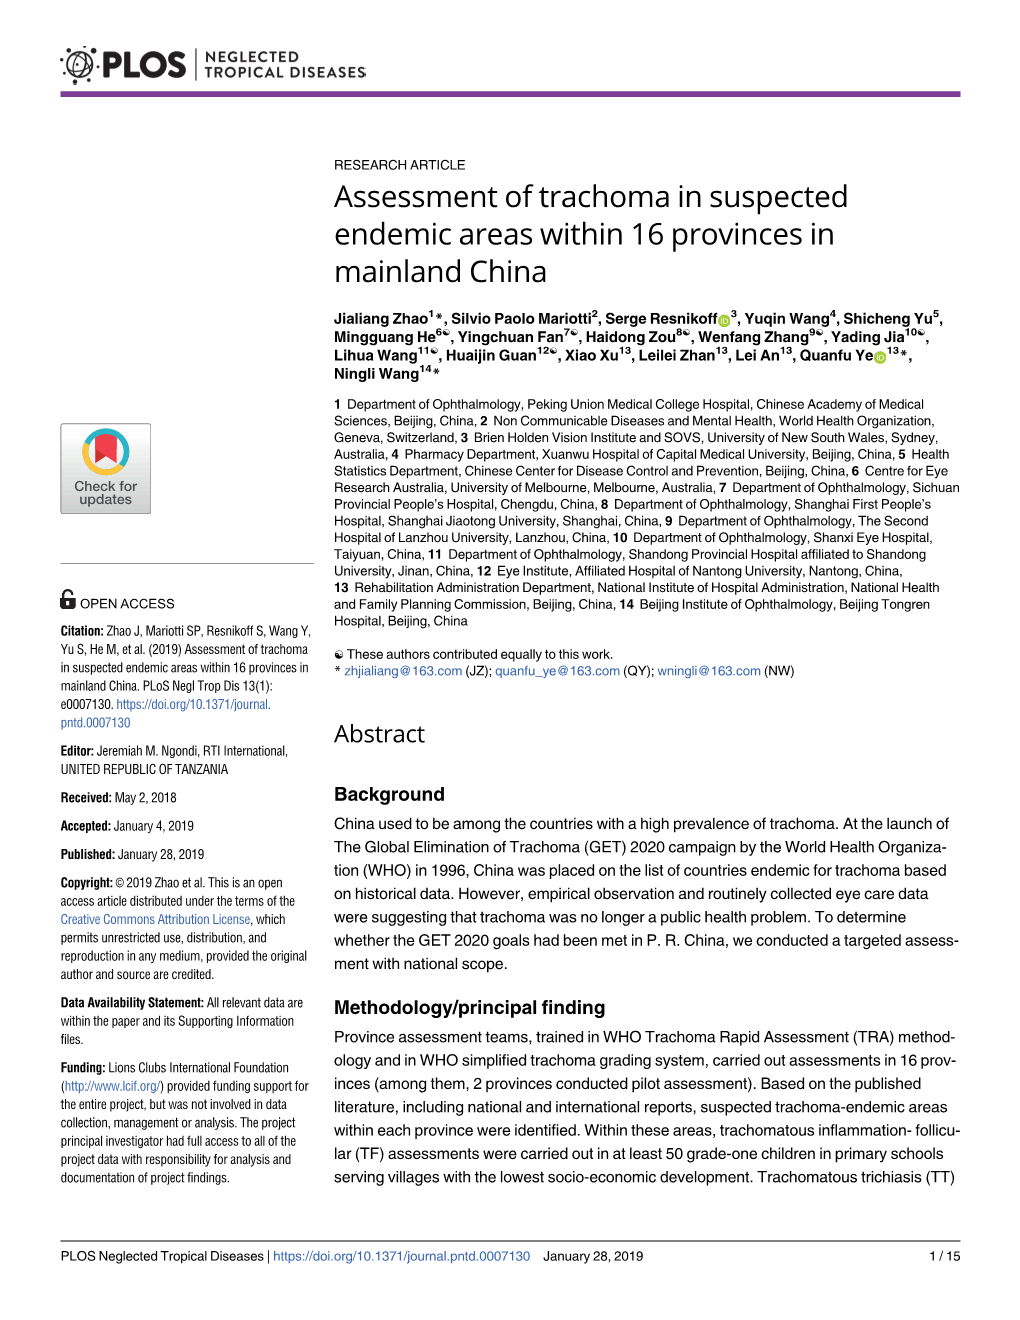 Assessment of Trachoma in Suspected Endemic Areas Within 16 Provinces in Mainland China